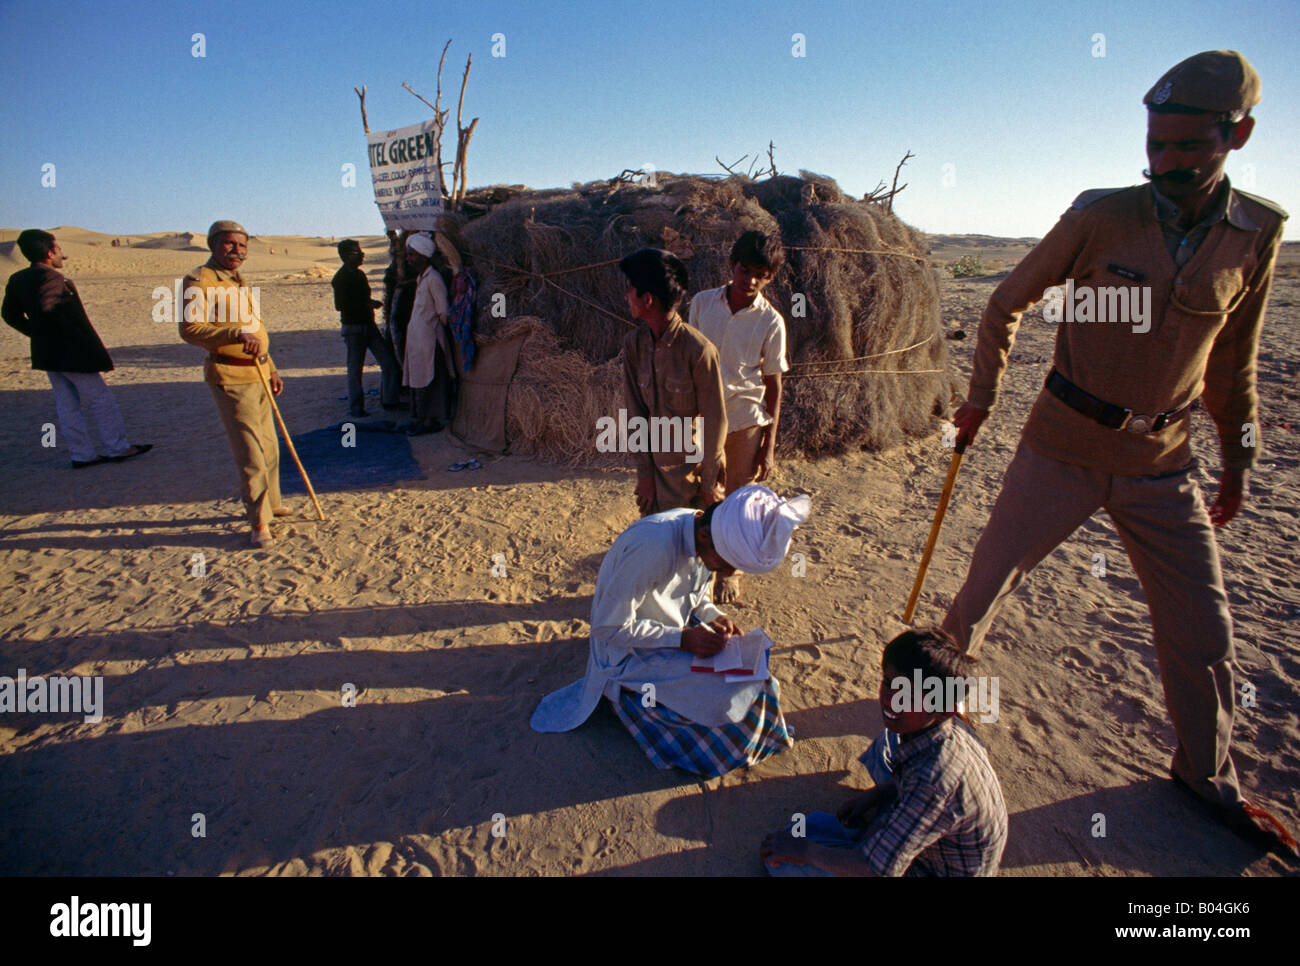 Thar Desert India Hotel Green Soldier With Lathi Stick & People Stock Photo